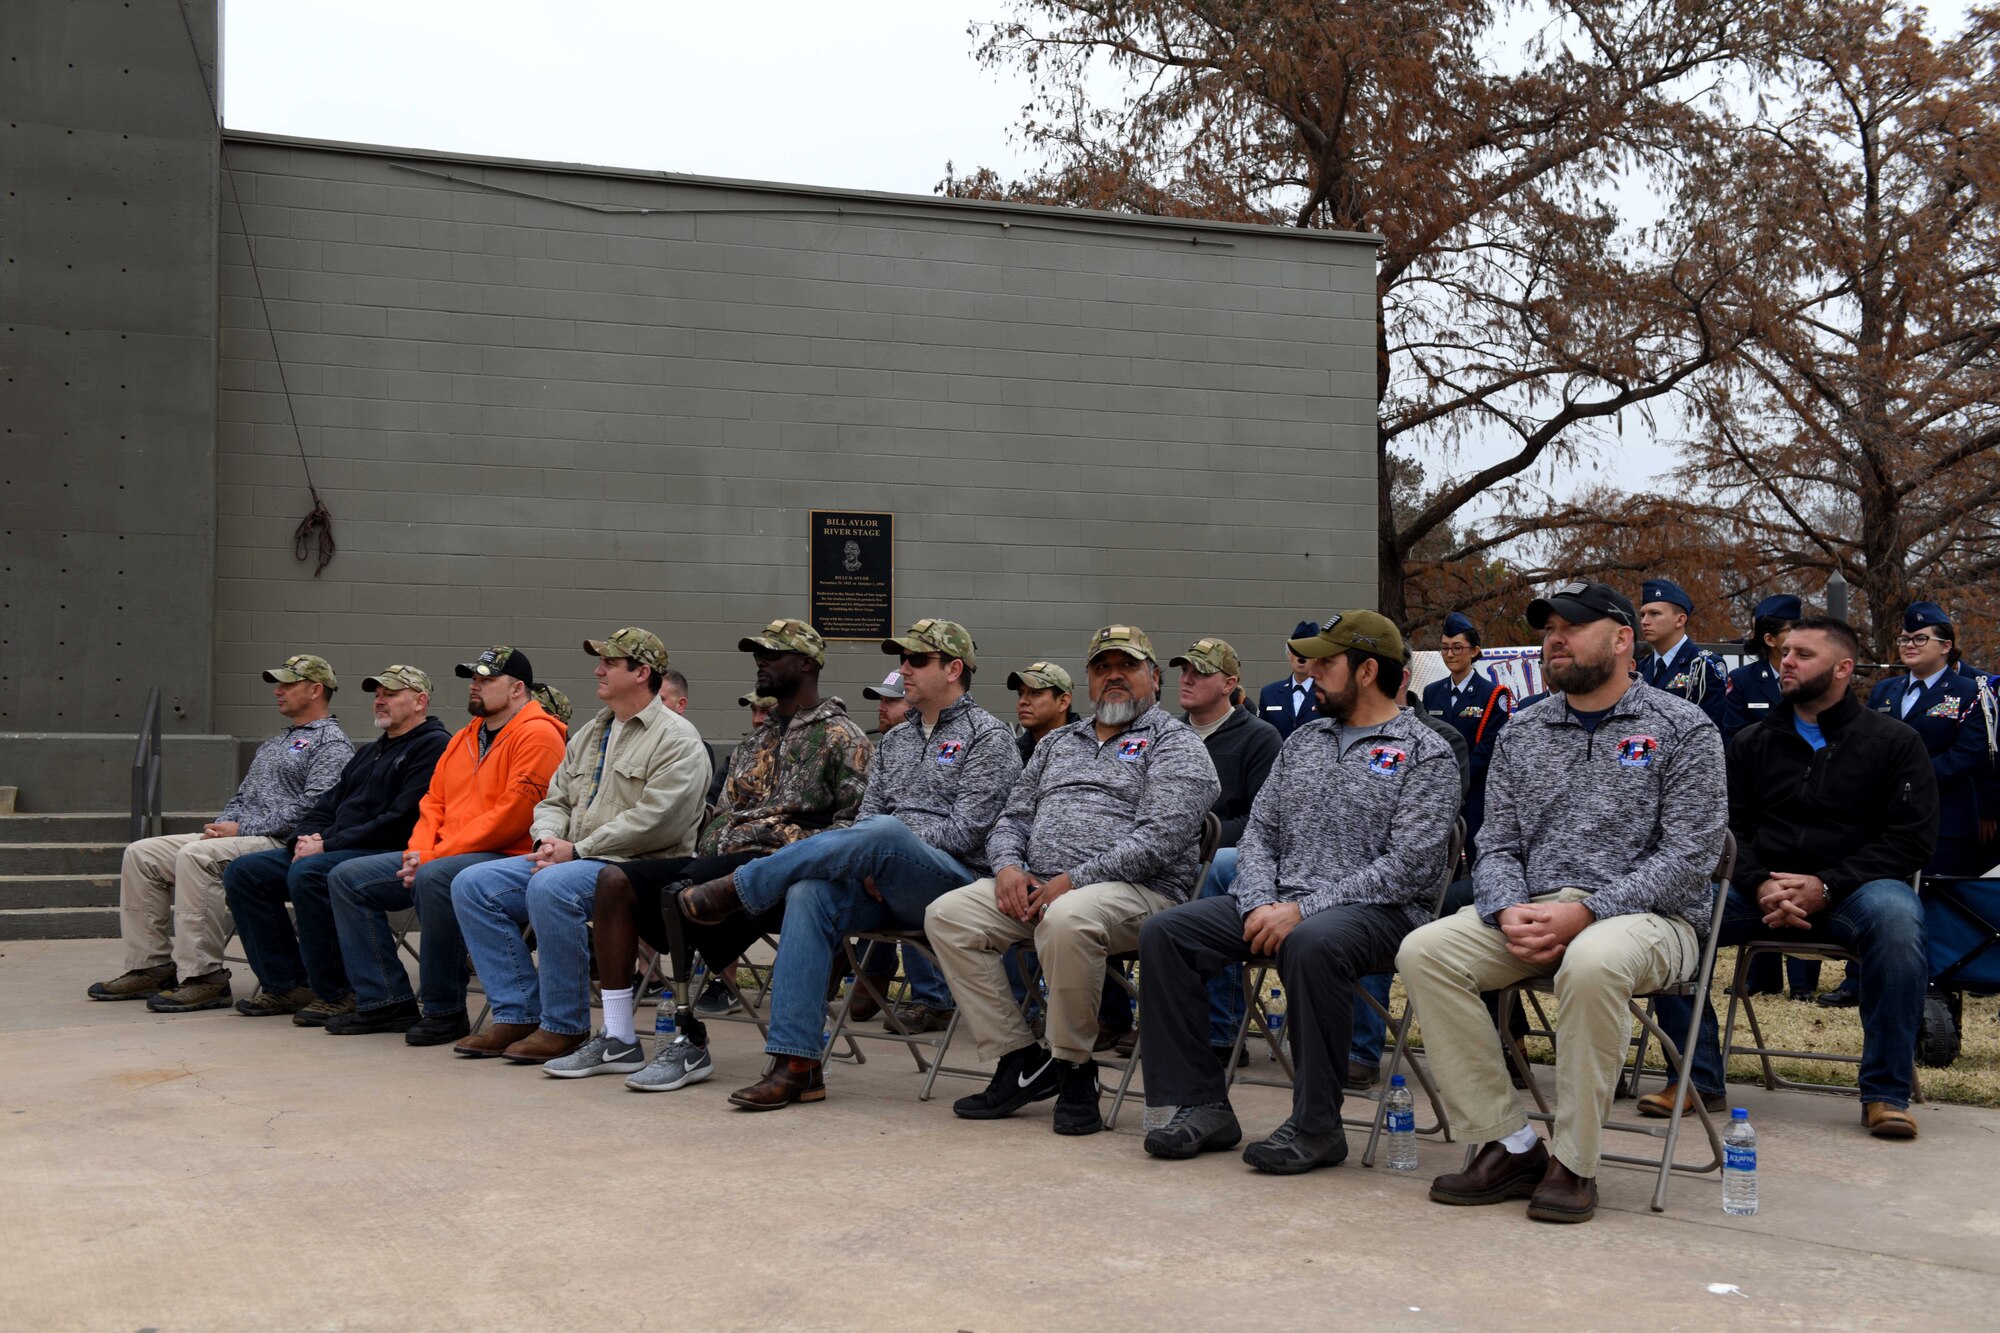 U.S. Armed Forces veterans participate in the Hero’s Hunt Honor Concert at the Bill Aylor Sr. Memorial RiverStage in San Angelo, Texas, Dec. 6, 2018. The Hero’s Hunting Foundation is an organization that provides therapy, community and support to American veterans through hunting. (U.S. Air Force photo by Senior Airman Randall Moose/Released)